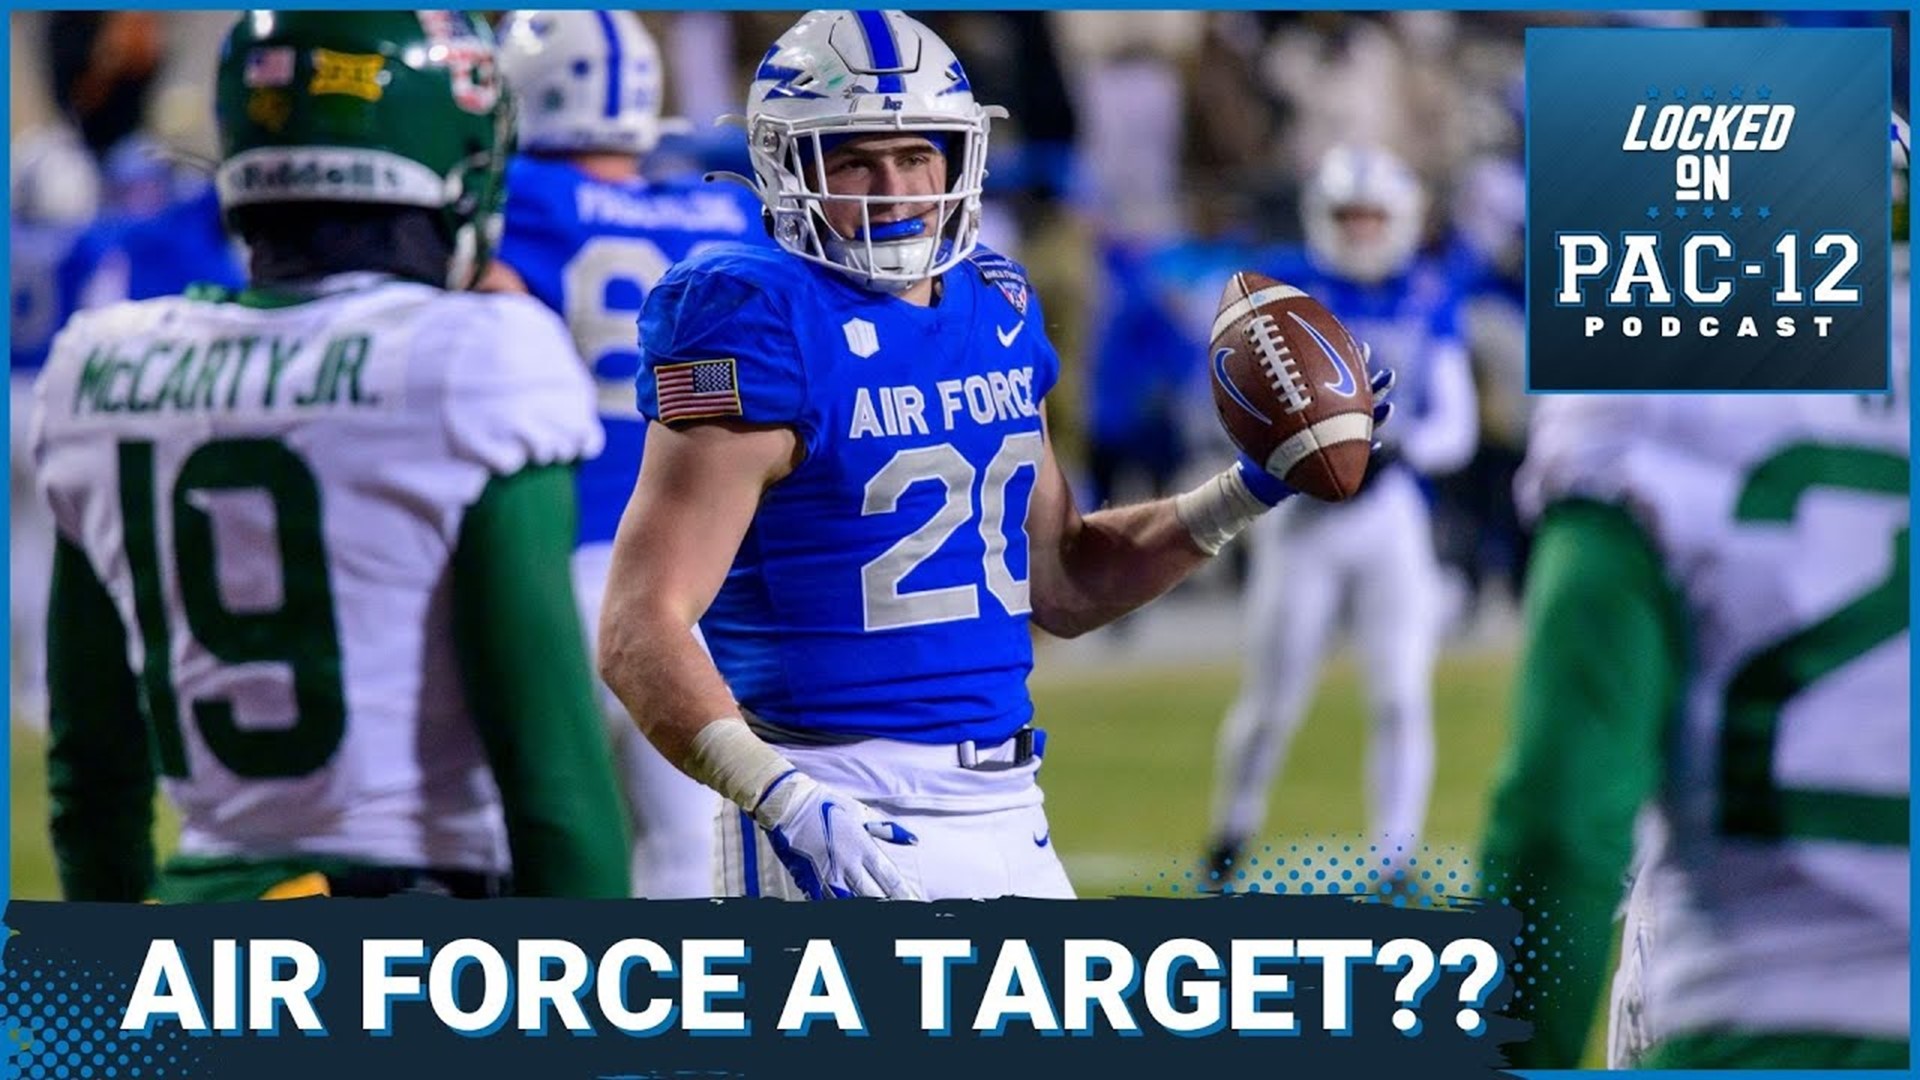 Several Mountain West teams, such as Boise, Fresno, and San Diego, are likely to be considered as expansion programs for the Pac-12. Why is Air Force overlooked?